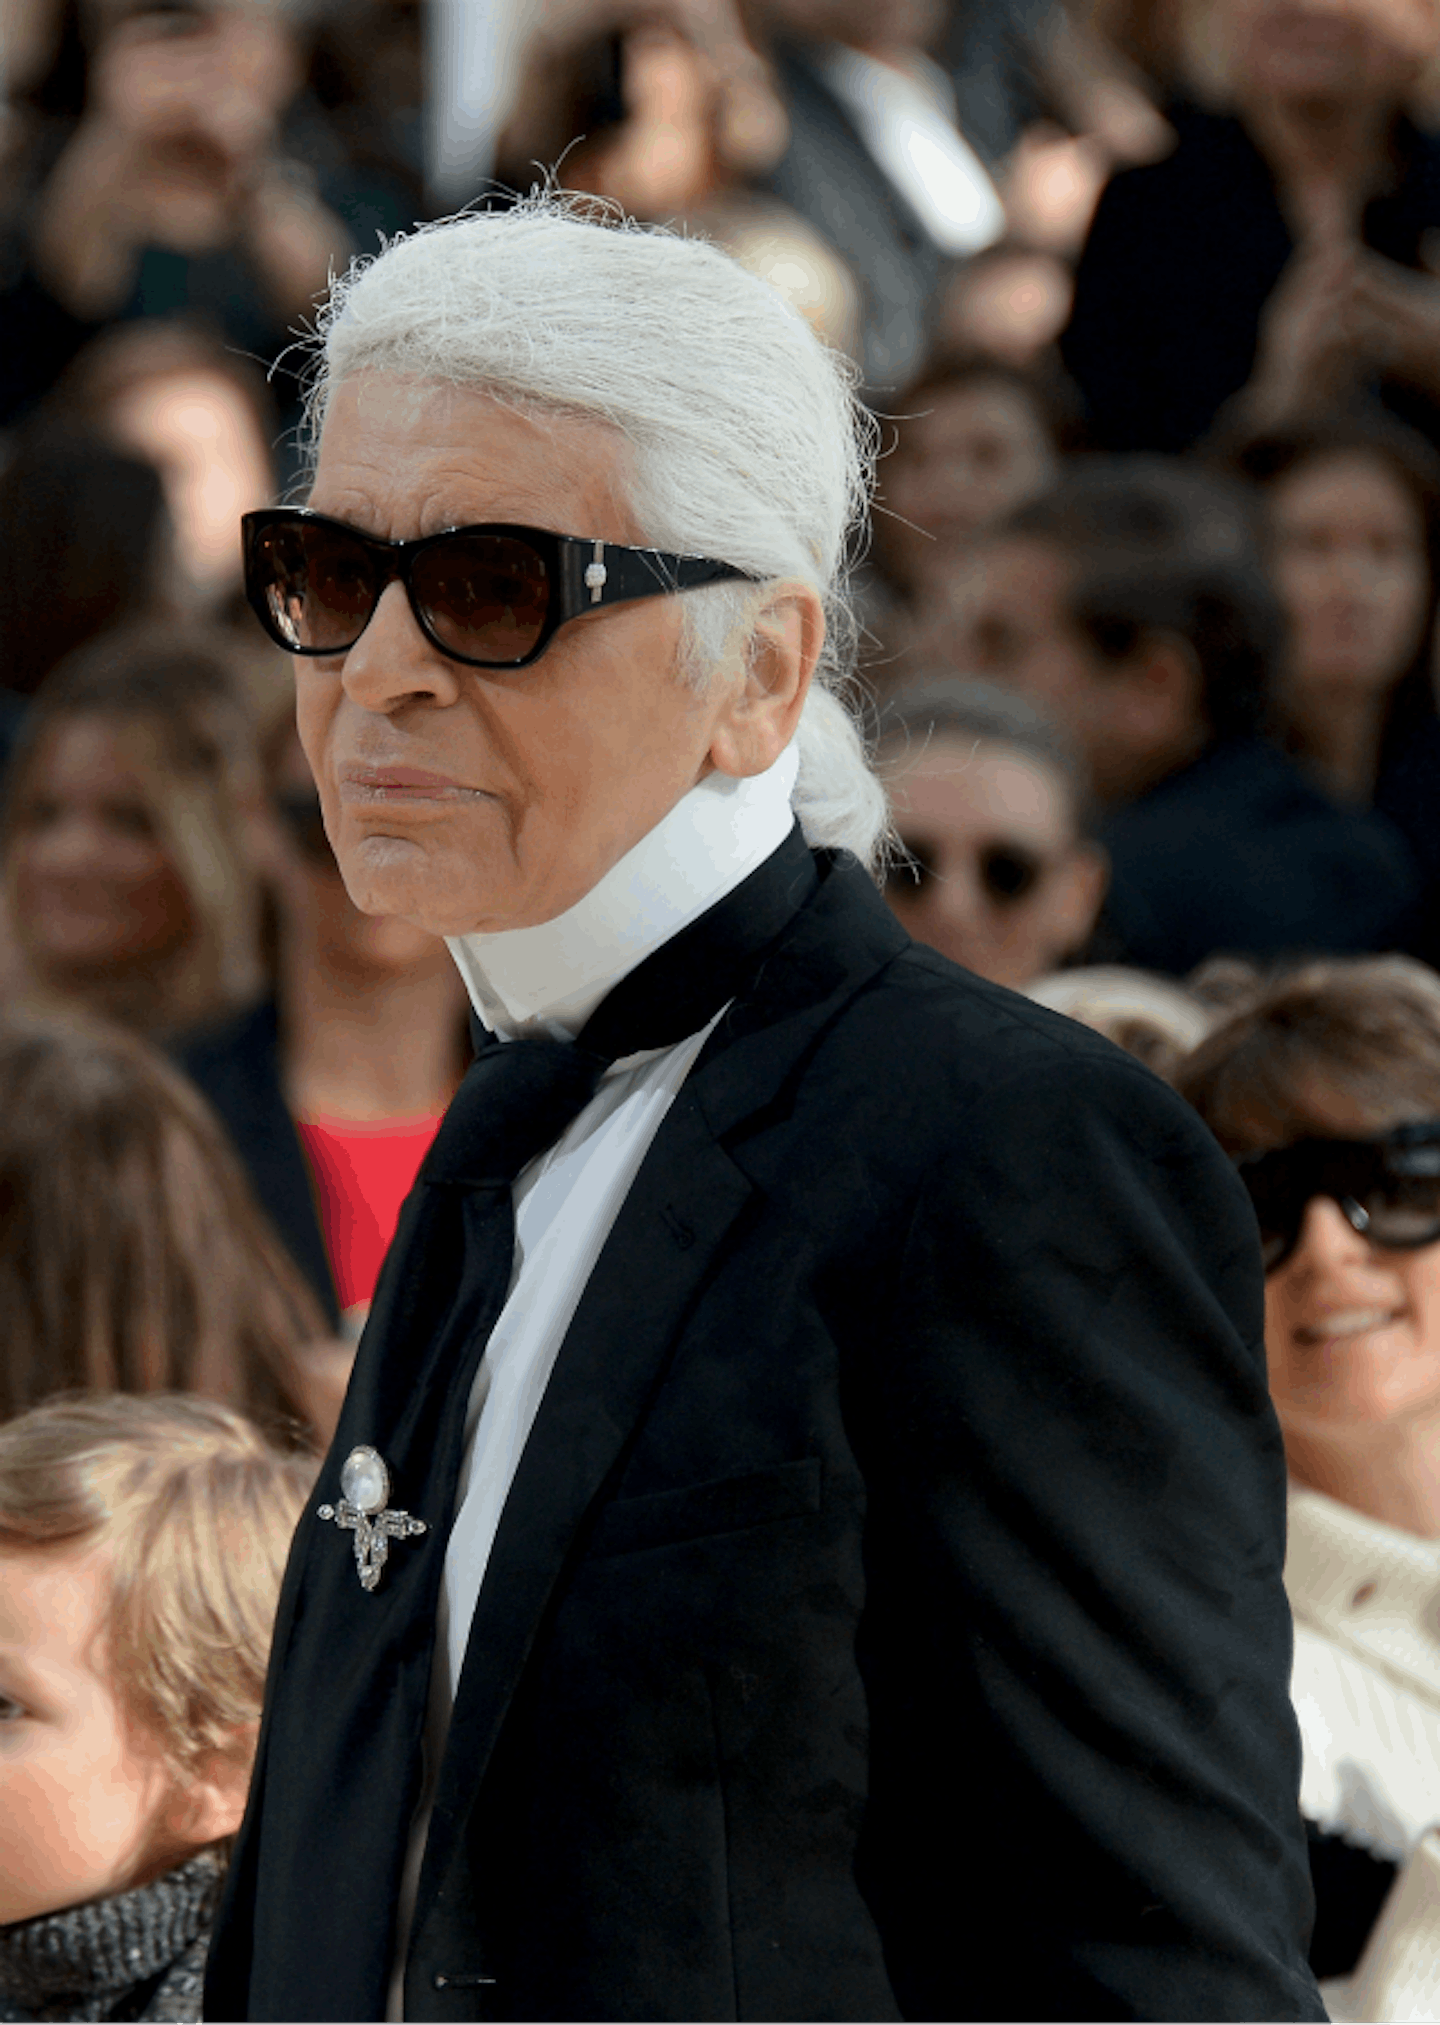 Karl Lagerfeld's most controversial quotes on fat women - Vox